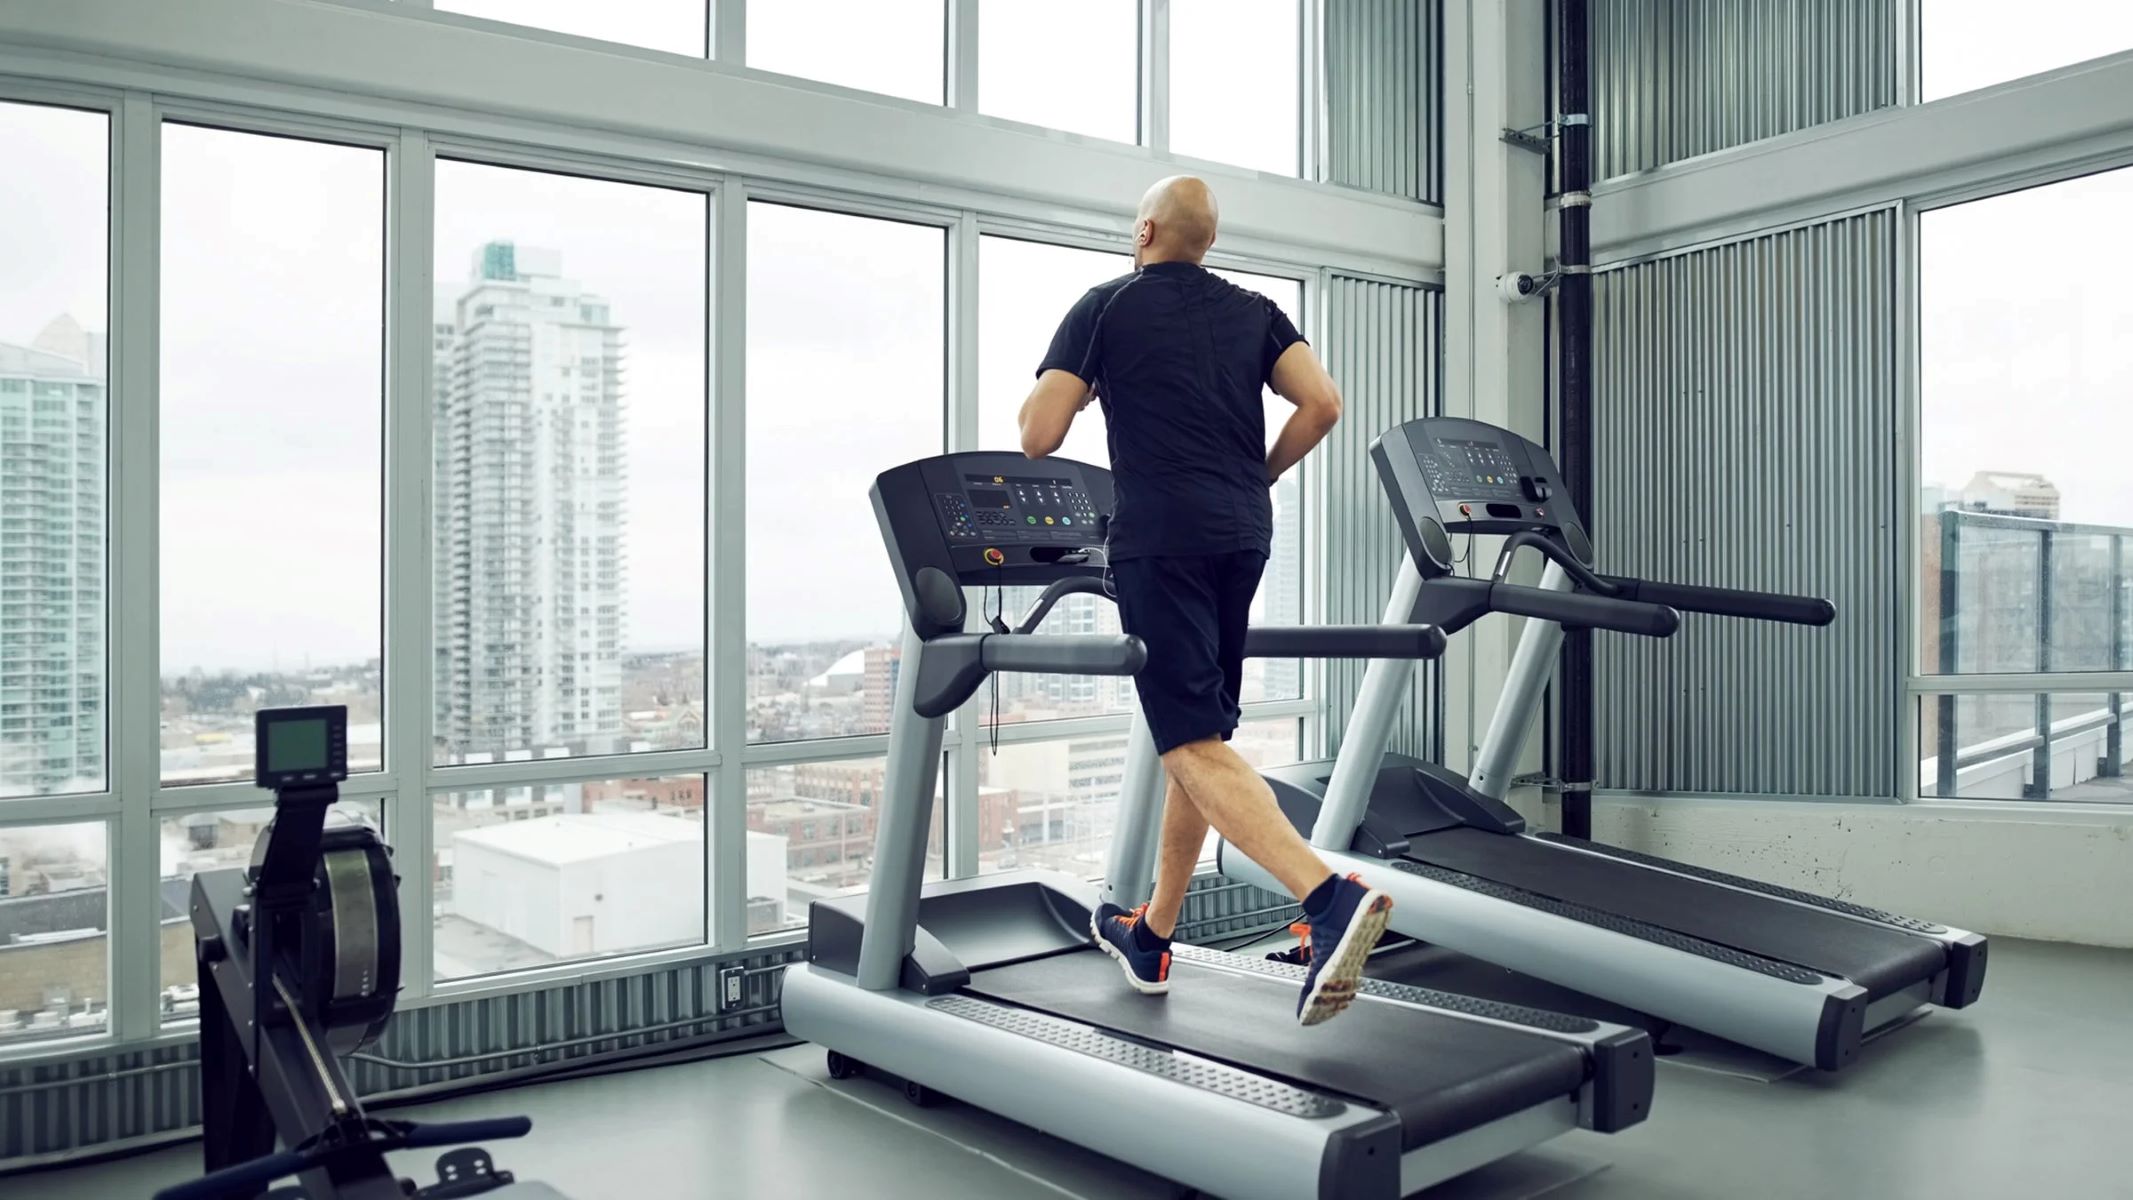 How Fast Is Speed 8 On A Treadmill